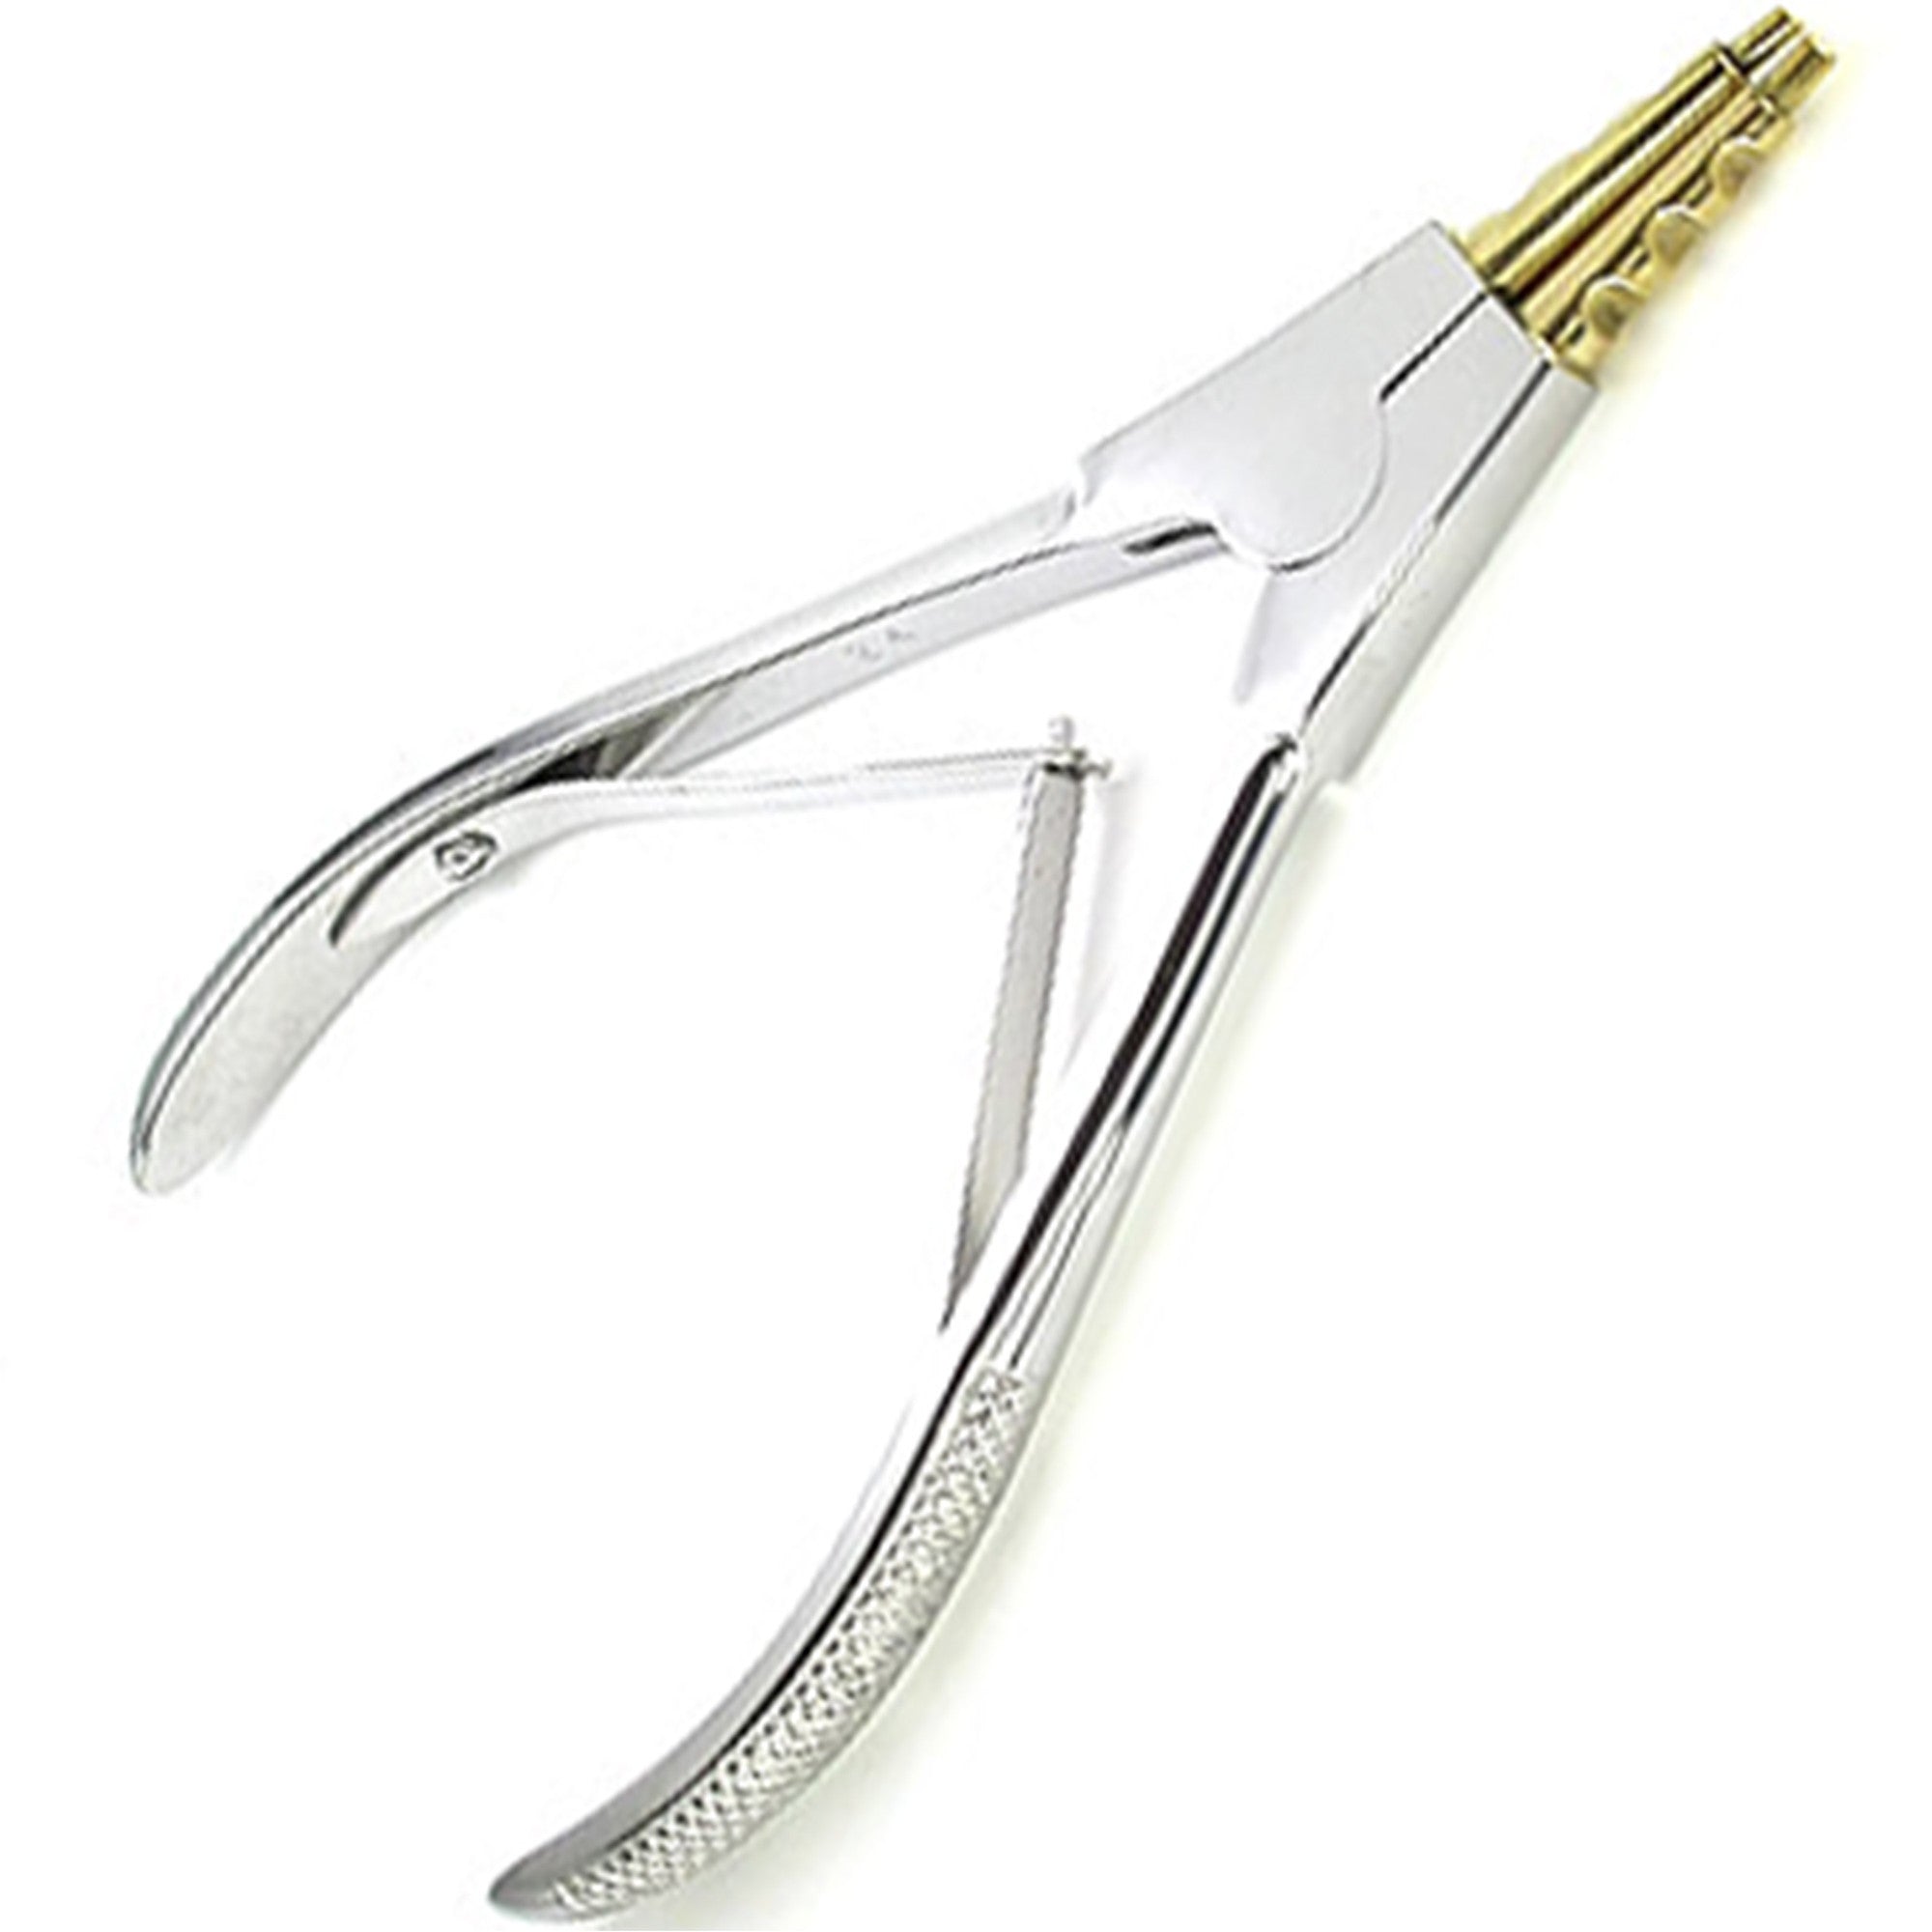 Body Jewelry RING OPENING Pliers BRASS Tip - 6 Inch